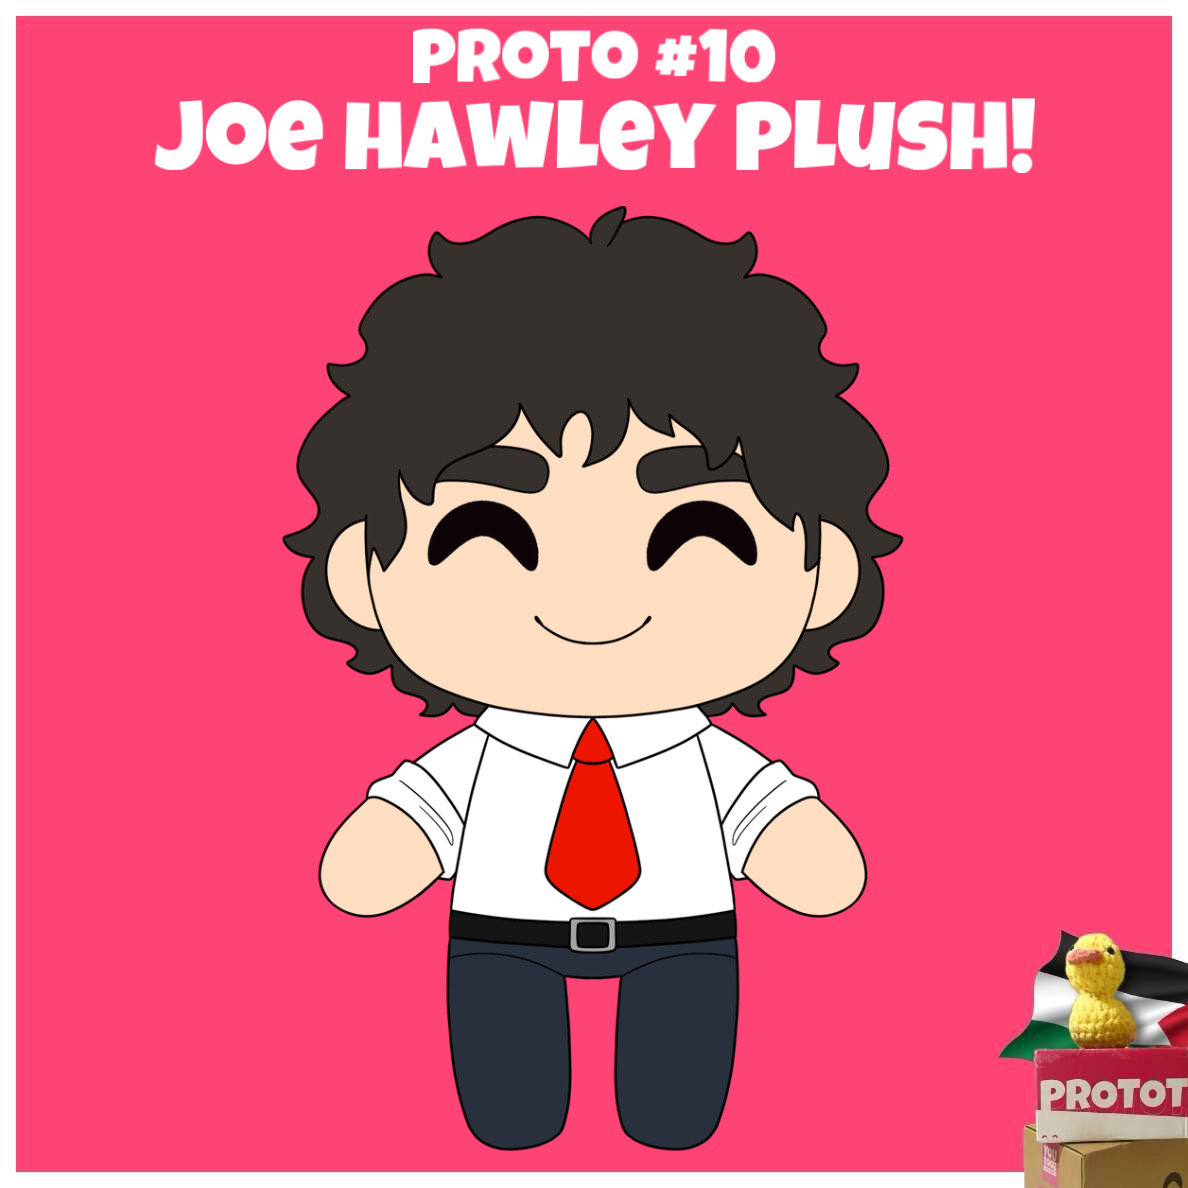 The final proto up for grabs during the youtooz news PCRF charity stream on may 4th at 3pm EST is the Joe Hawley plush from Tally Hall!